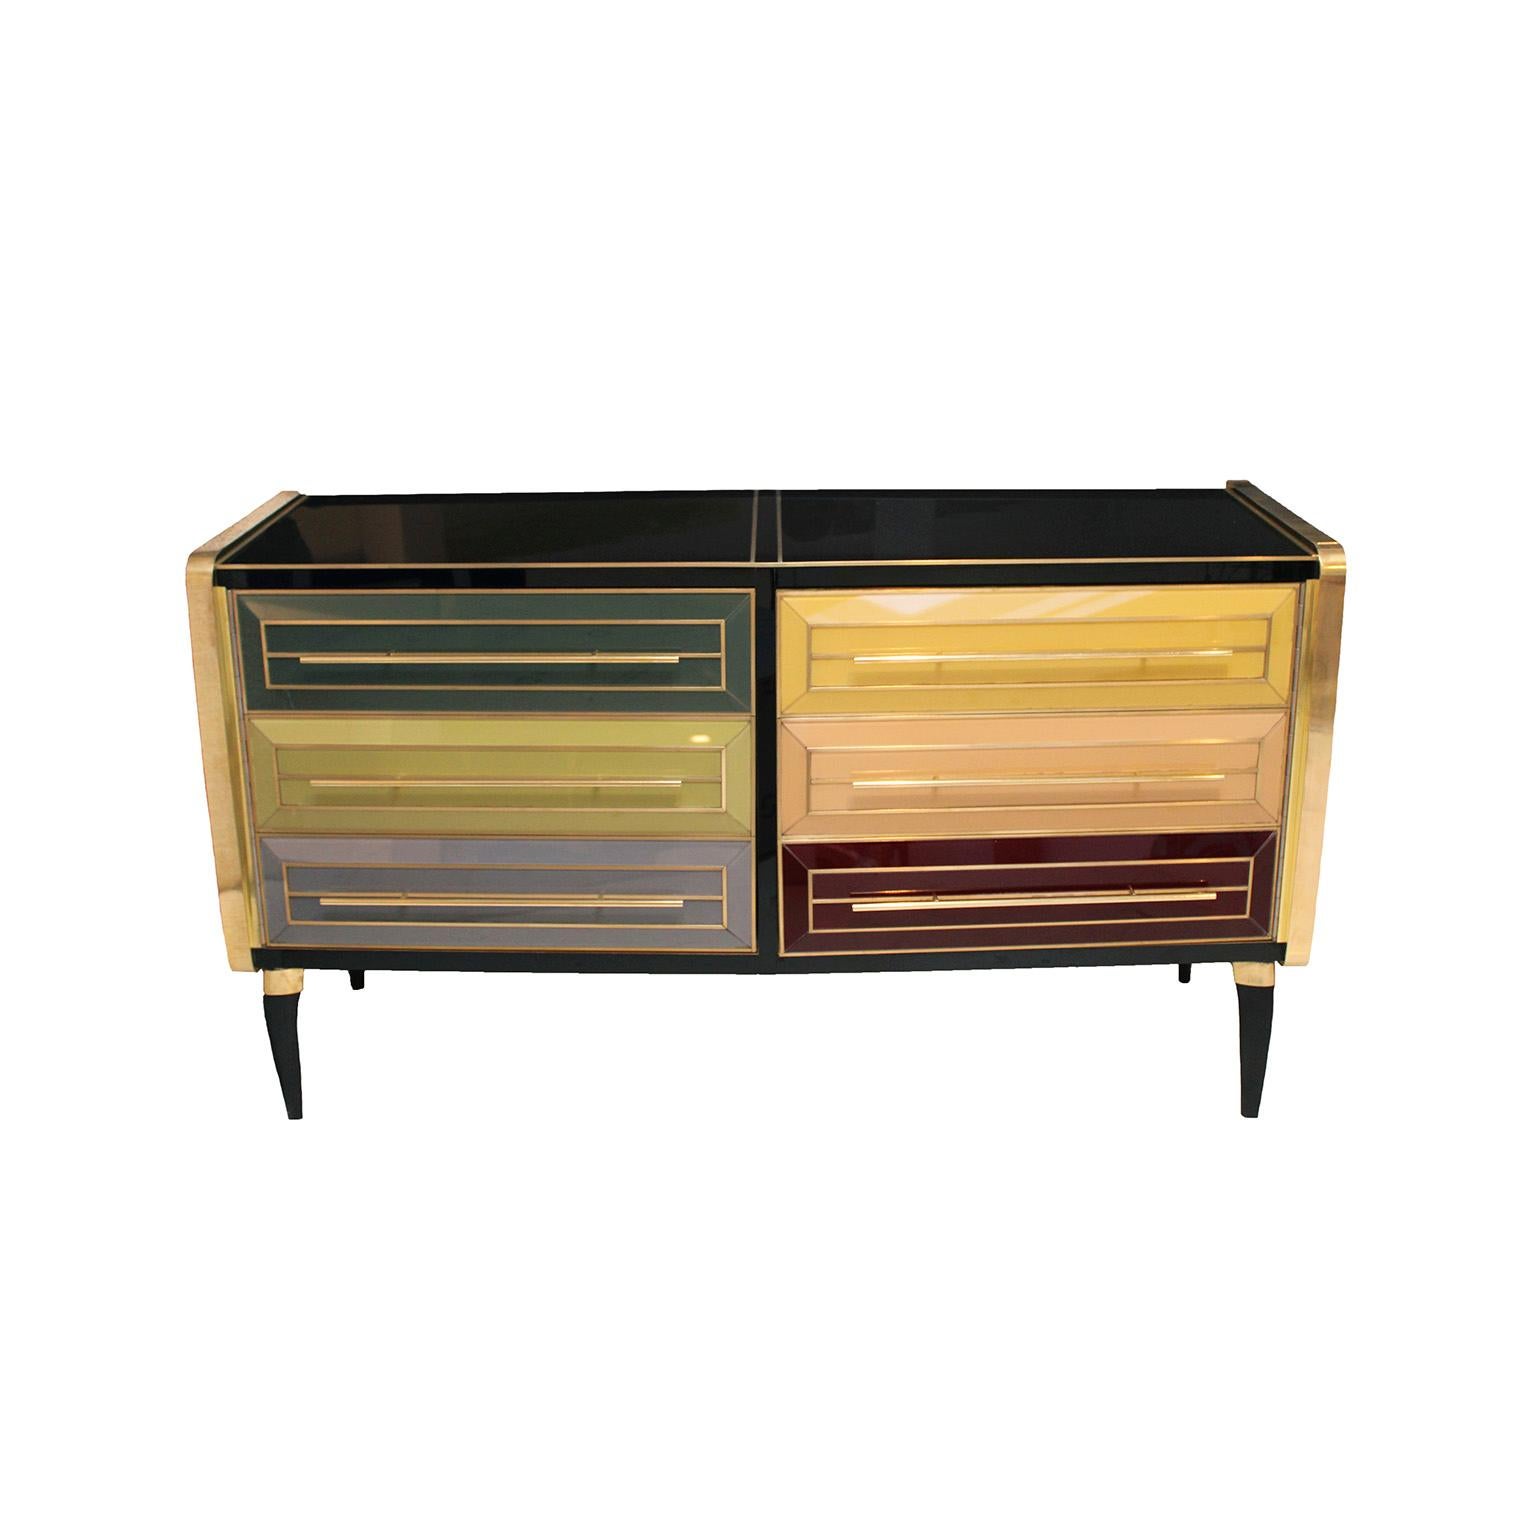 Mid-Century Modern Solid Wood And Colored Glass Bar Furniture, Italy 1950's For Sale